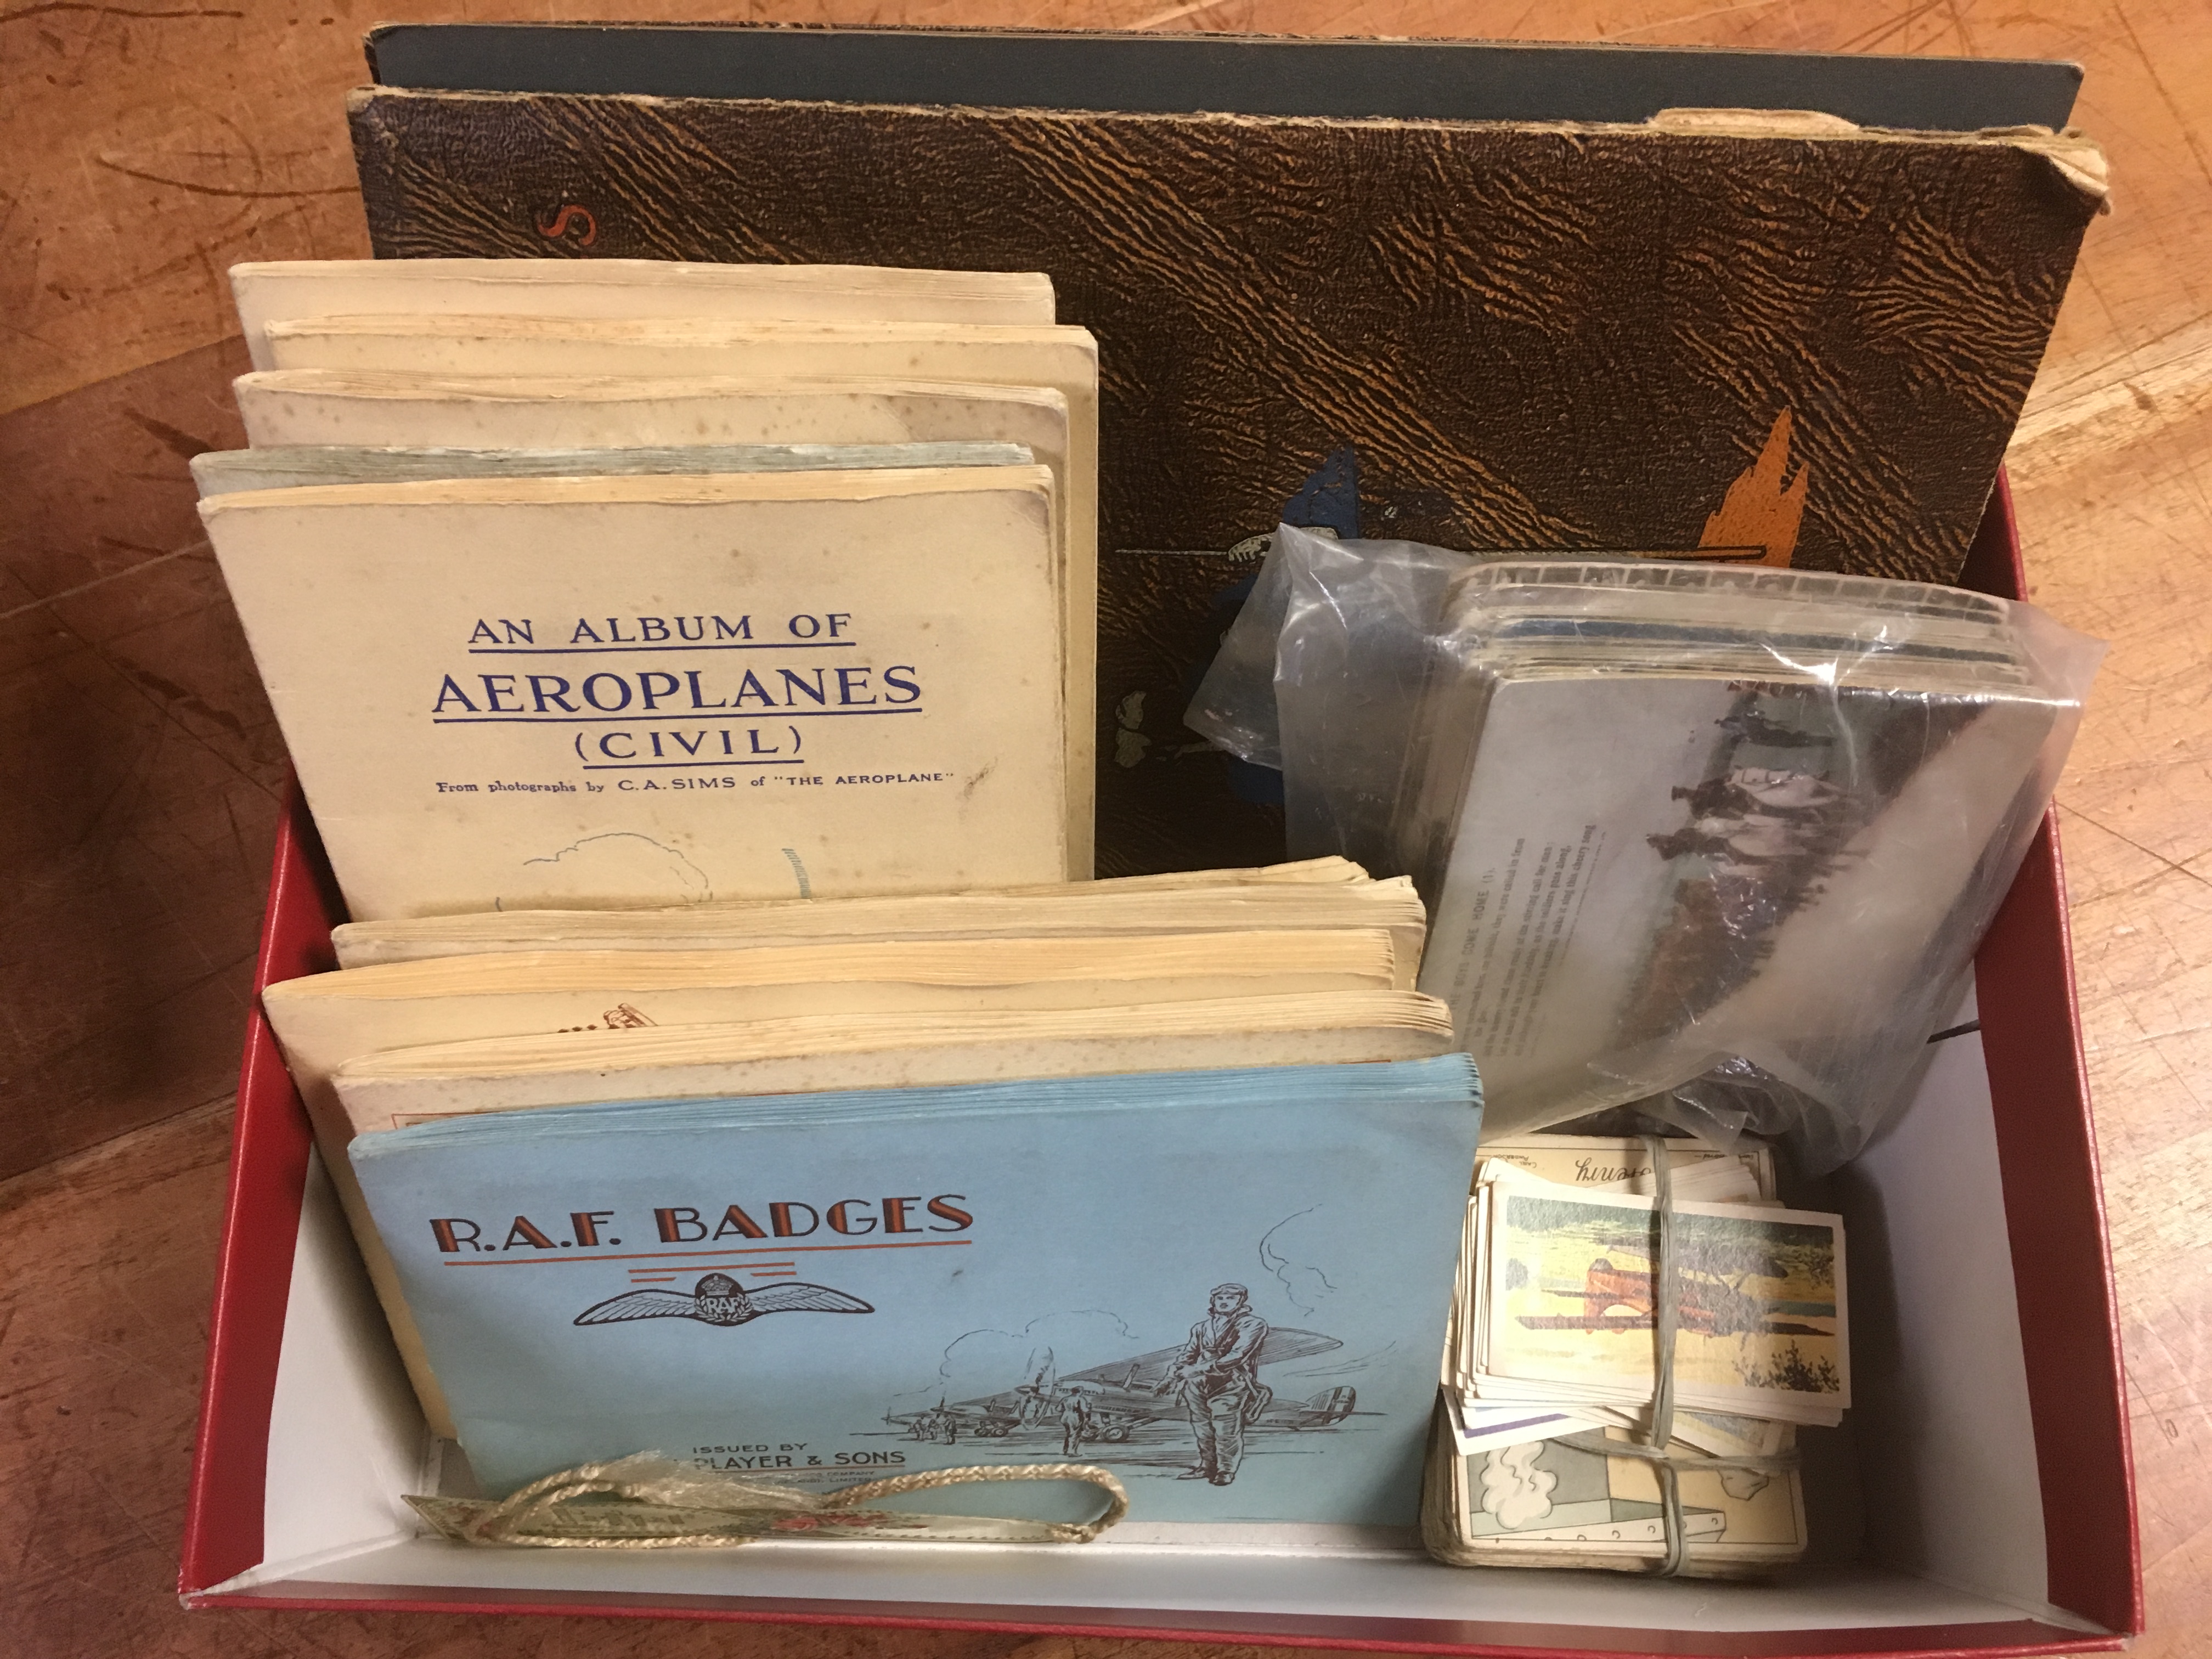 BOX WITH CIGARETTE IN SLOT IN ALBUM, STUCK DOWN PENNY ALBUMS (10), AND LOOSE,